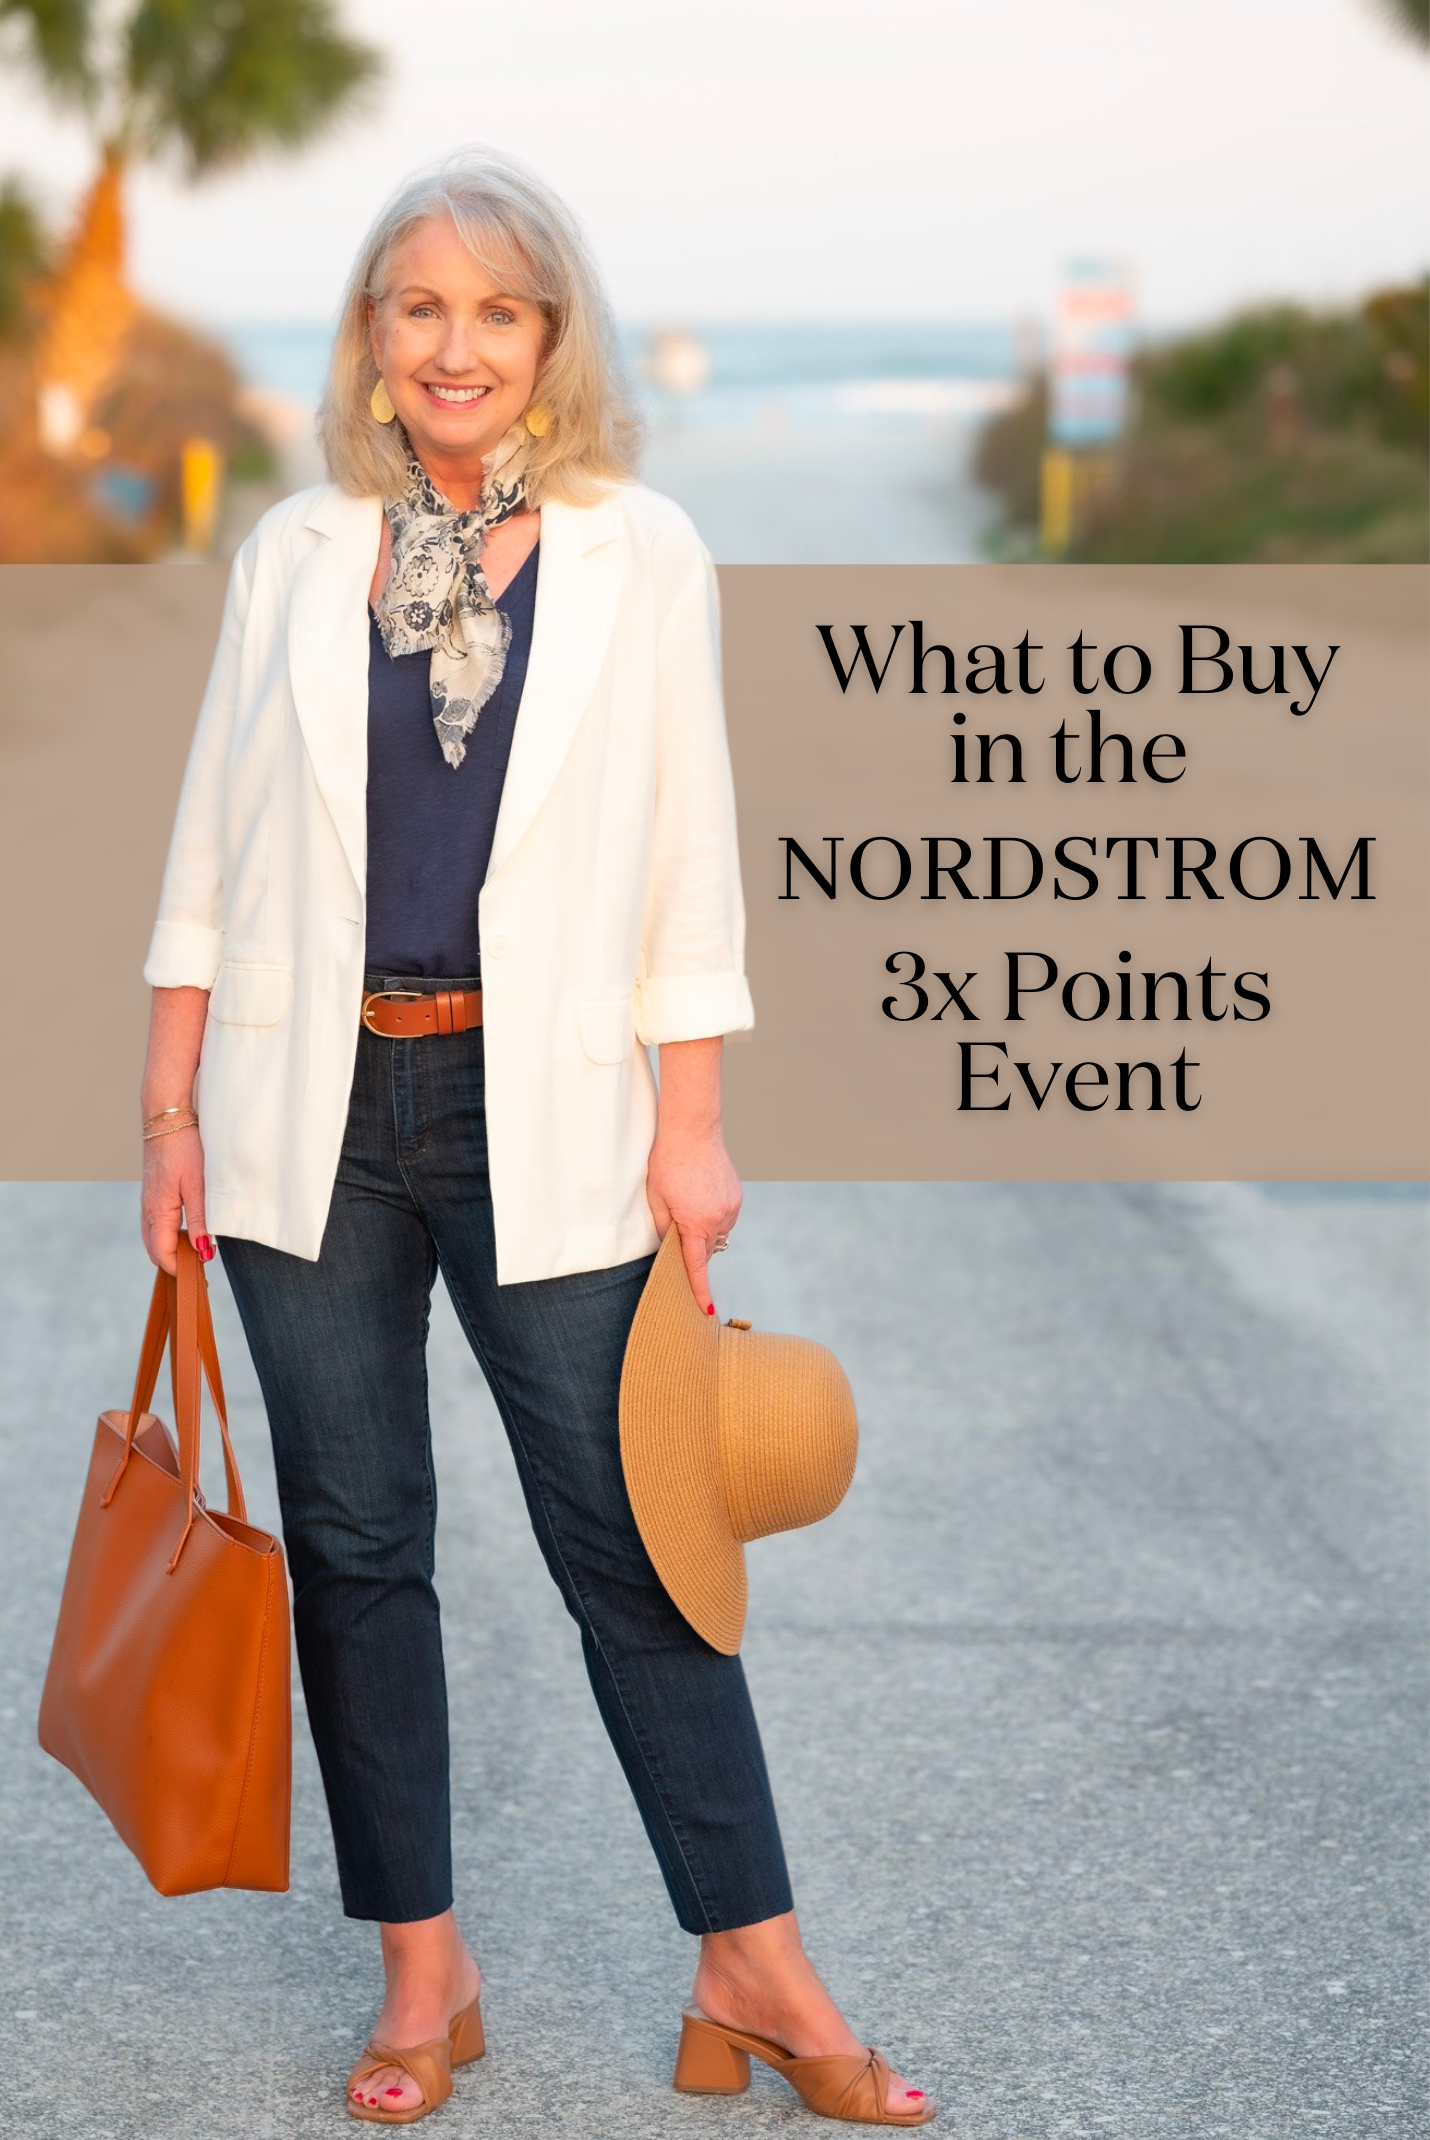 What to Buy in the Nordstrom 3x Points Event